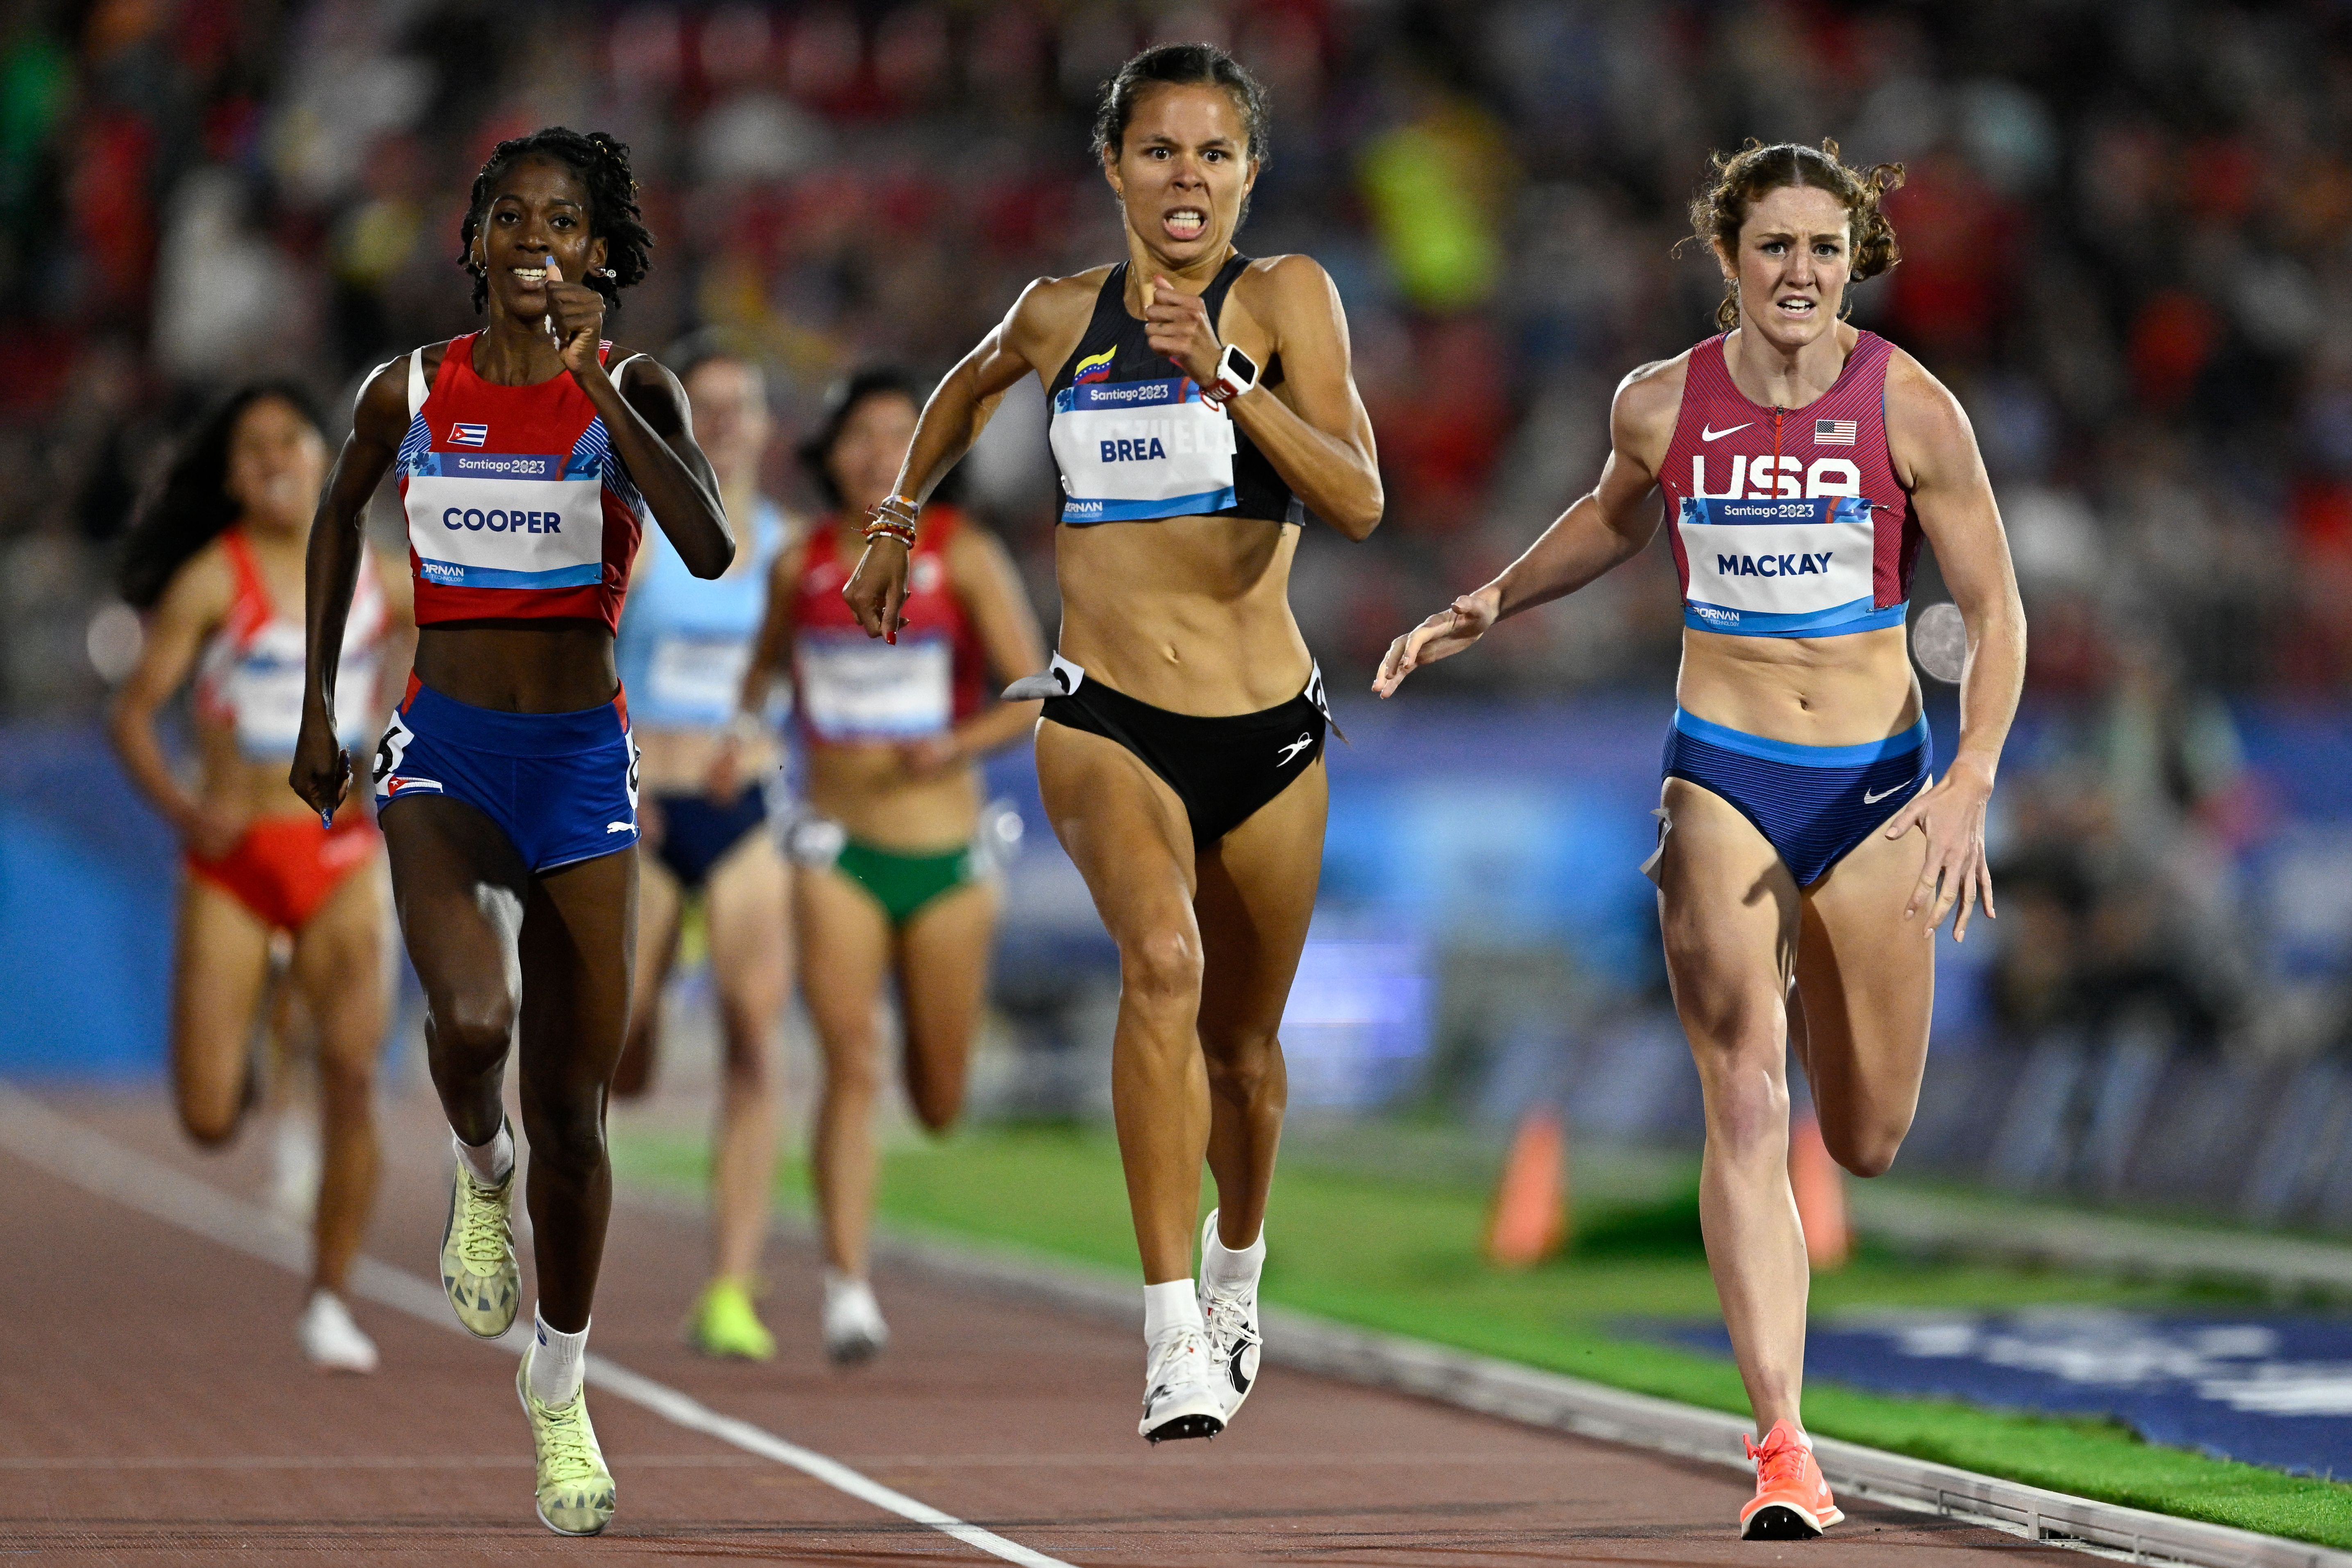 Joselyn Brea holds off Daily Marlins Cooper and Emily Mackay to win the 1500m at the Pan American Games